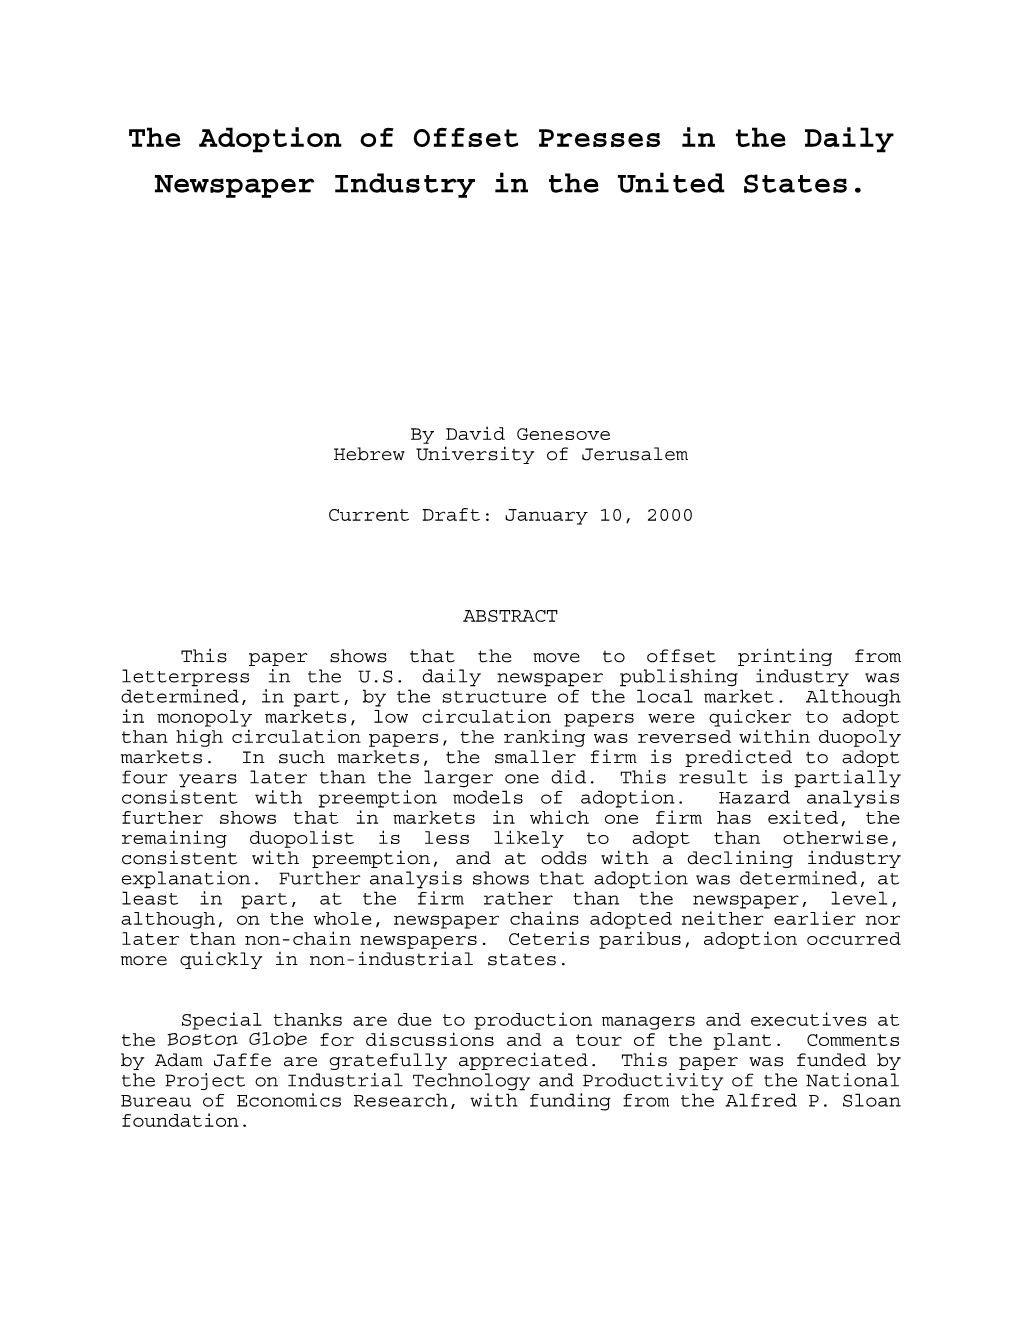 The Adoption of Offset Presses in the Daily Newspaper Industry in the United States